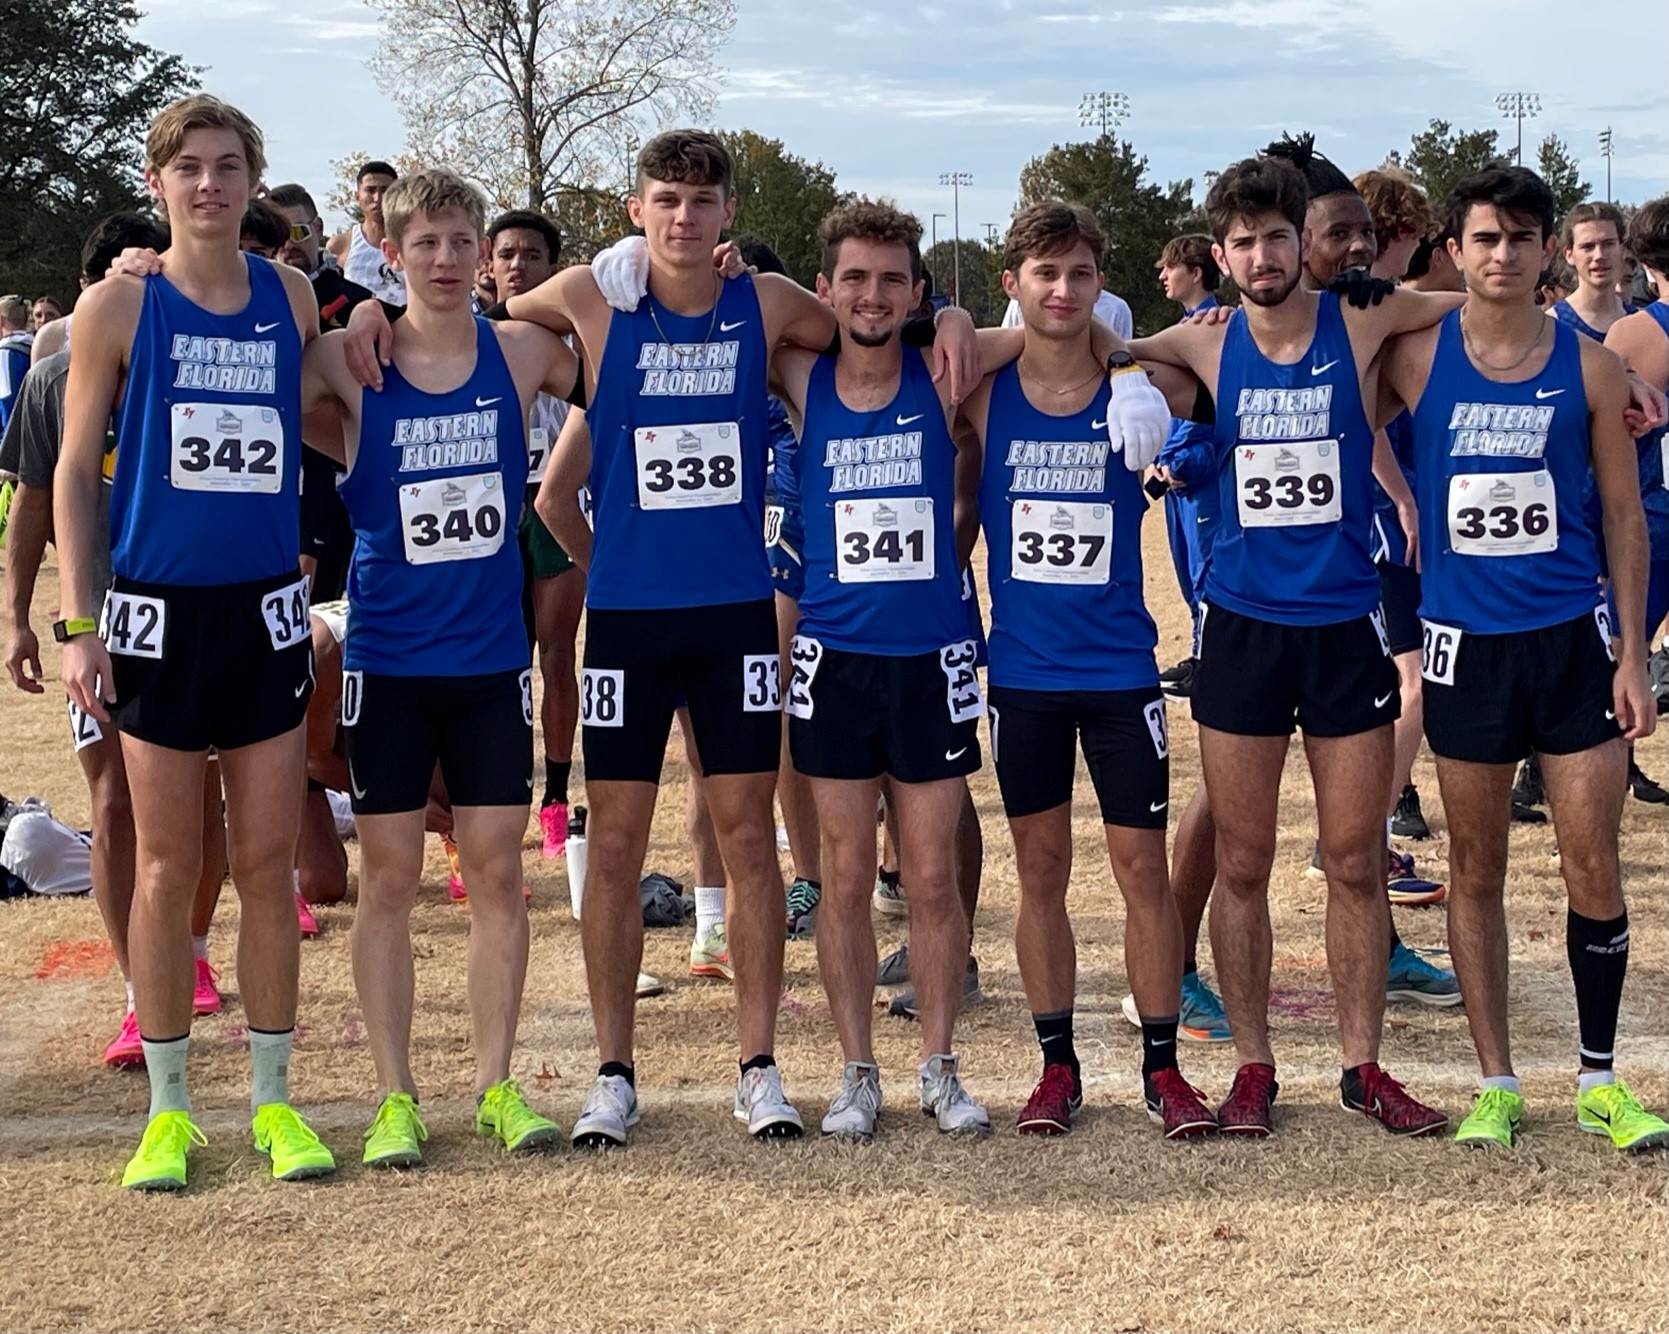 Men's cross country team places 17th at NJCAA Division I Cross Country Championships